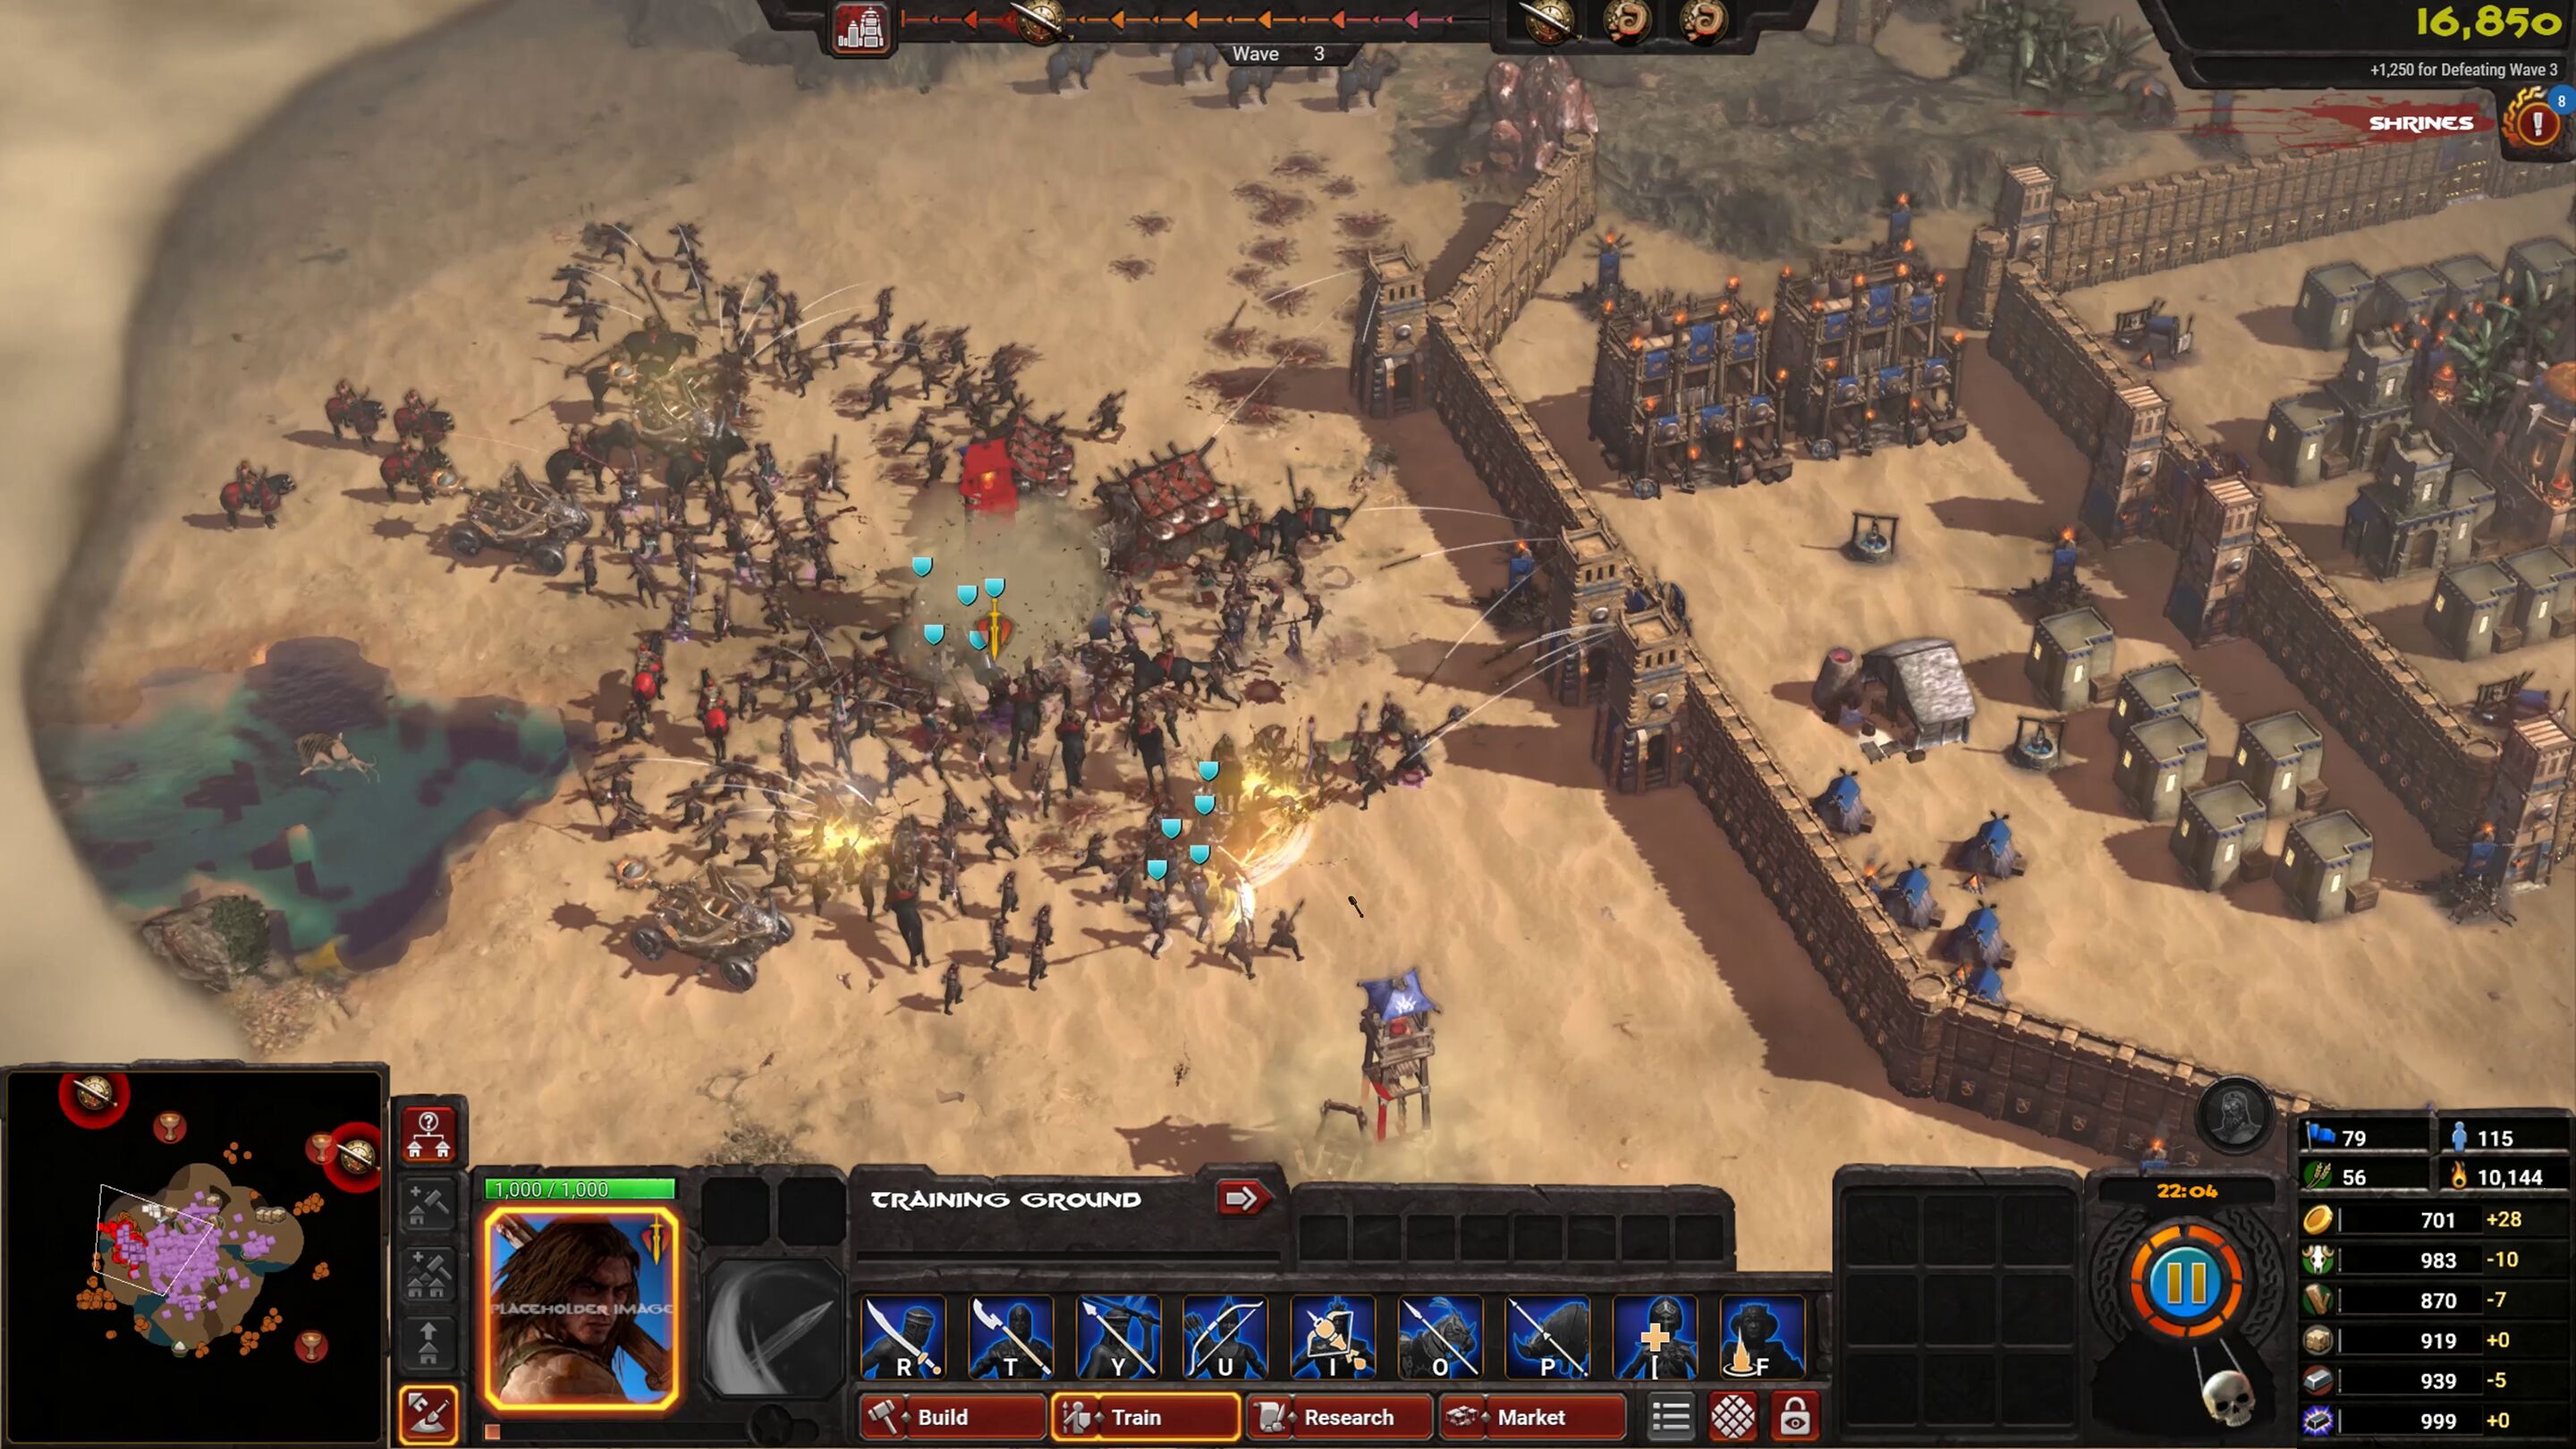 Fun Co Op Sets Conan Unconquered Apart From Other Survival Rts